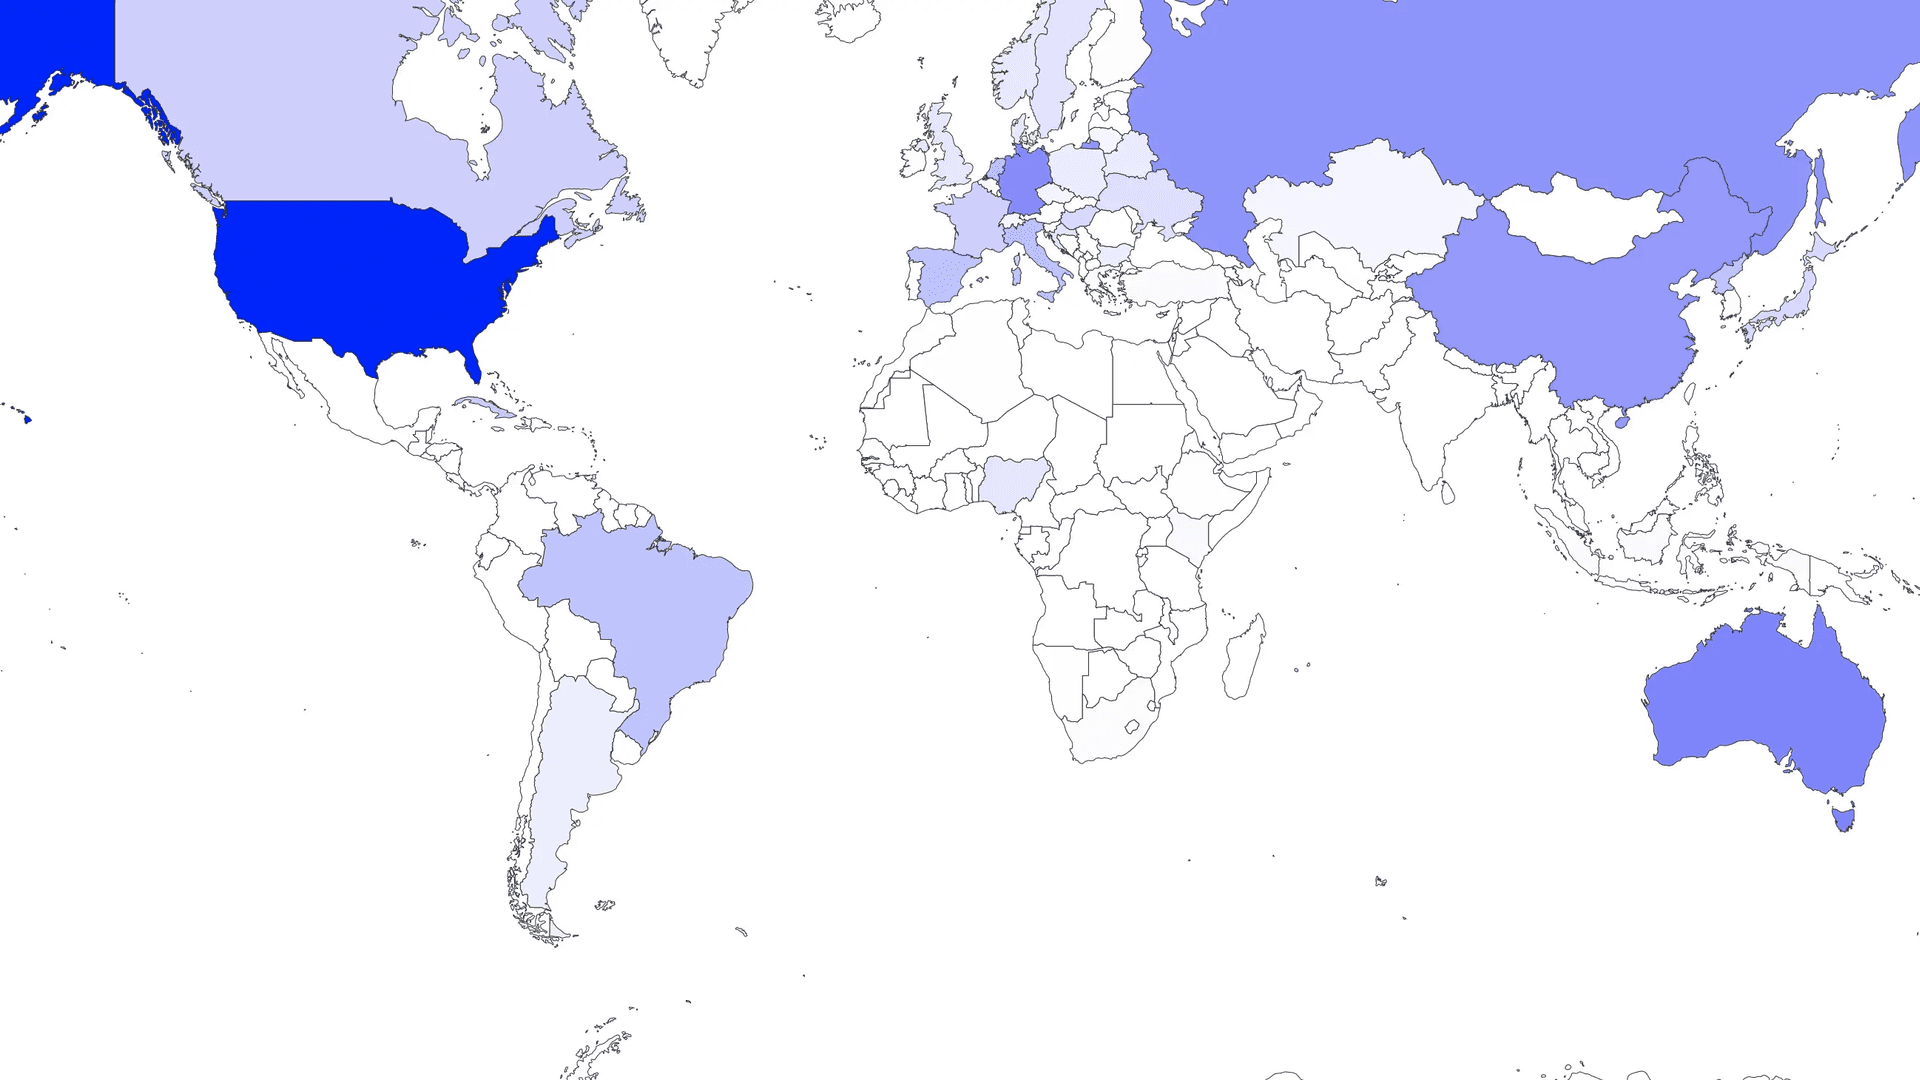 Map of all countries on Earth